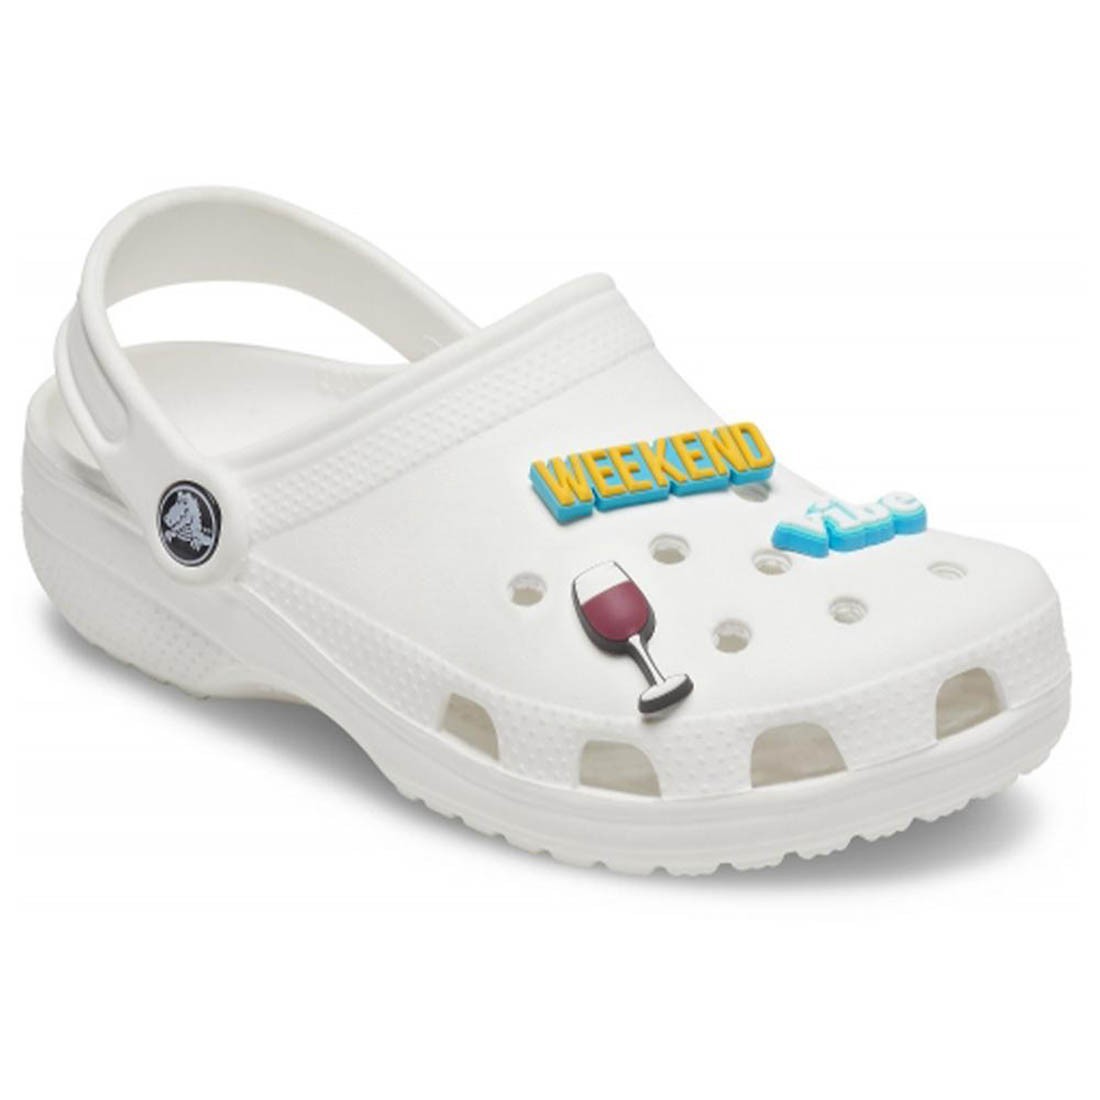 Shop Crocs Jibbitz Weekend Vibes Pack - Crocs, delivered to your home |  TheOutfit